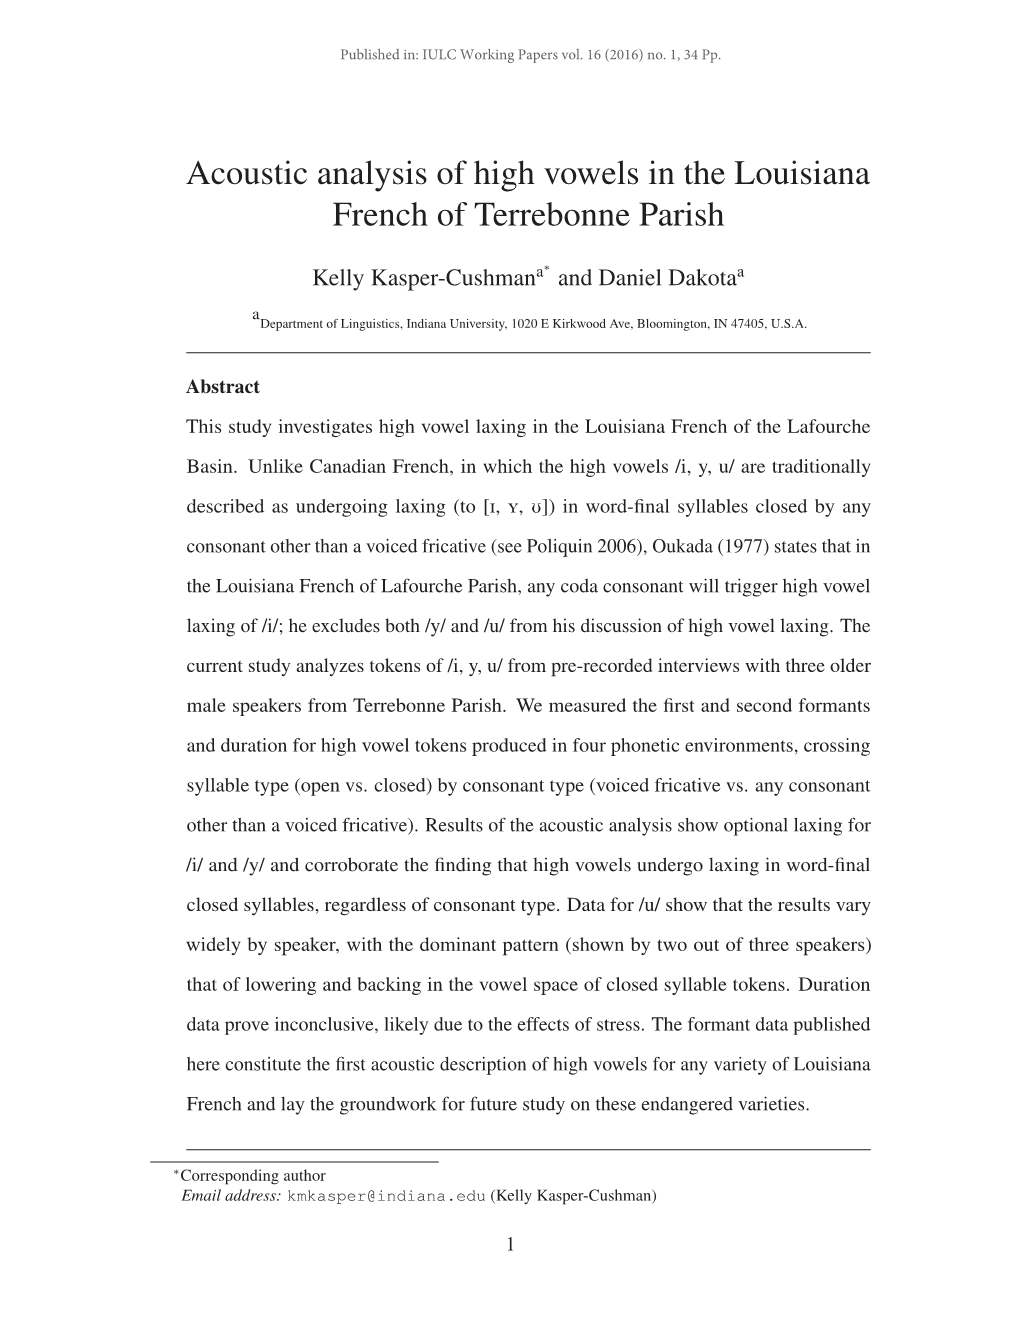 Acoustic Analysis of High Vowels in the Louisiana French of Terrebonne Parish